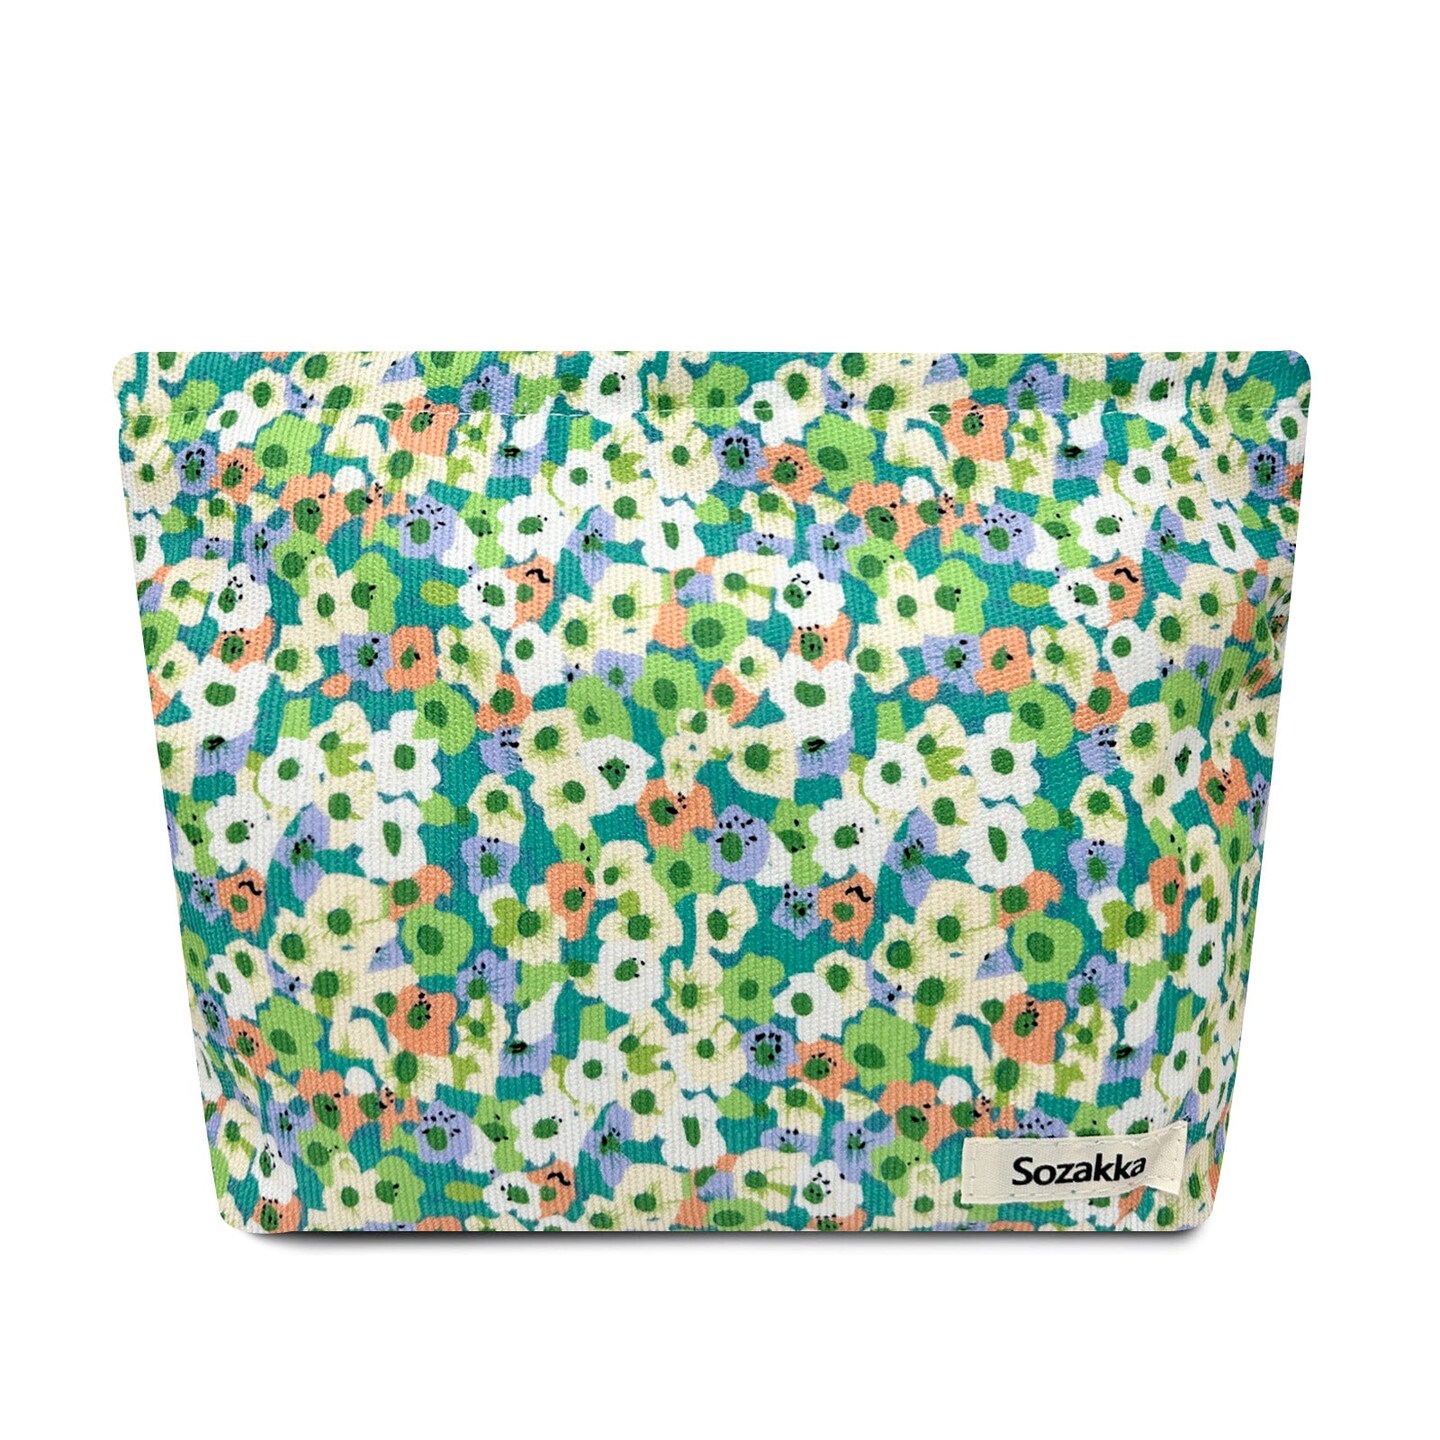 Wrapables Cosmetic Pouch, Makeup and Toiletry Travel Bag, Green Floral